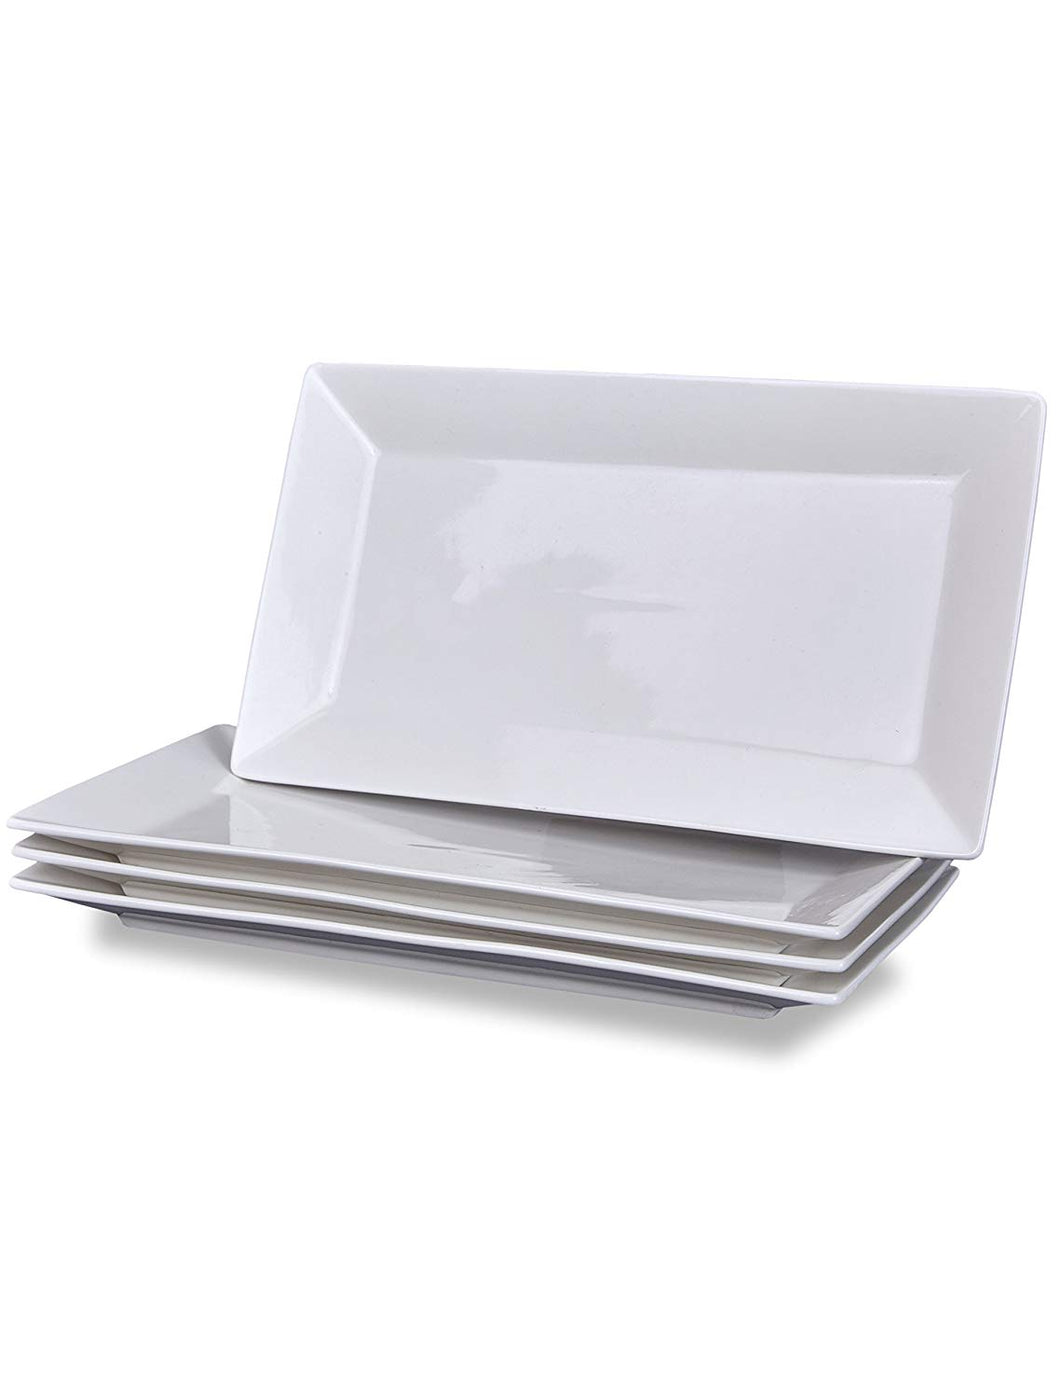 4 Serving Platters - Classic White Plate - Serving Trays for Parties - Microwave and Dishwasher Safe - 6.5 x 14 Inch